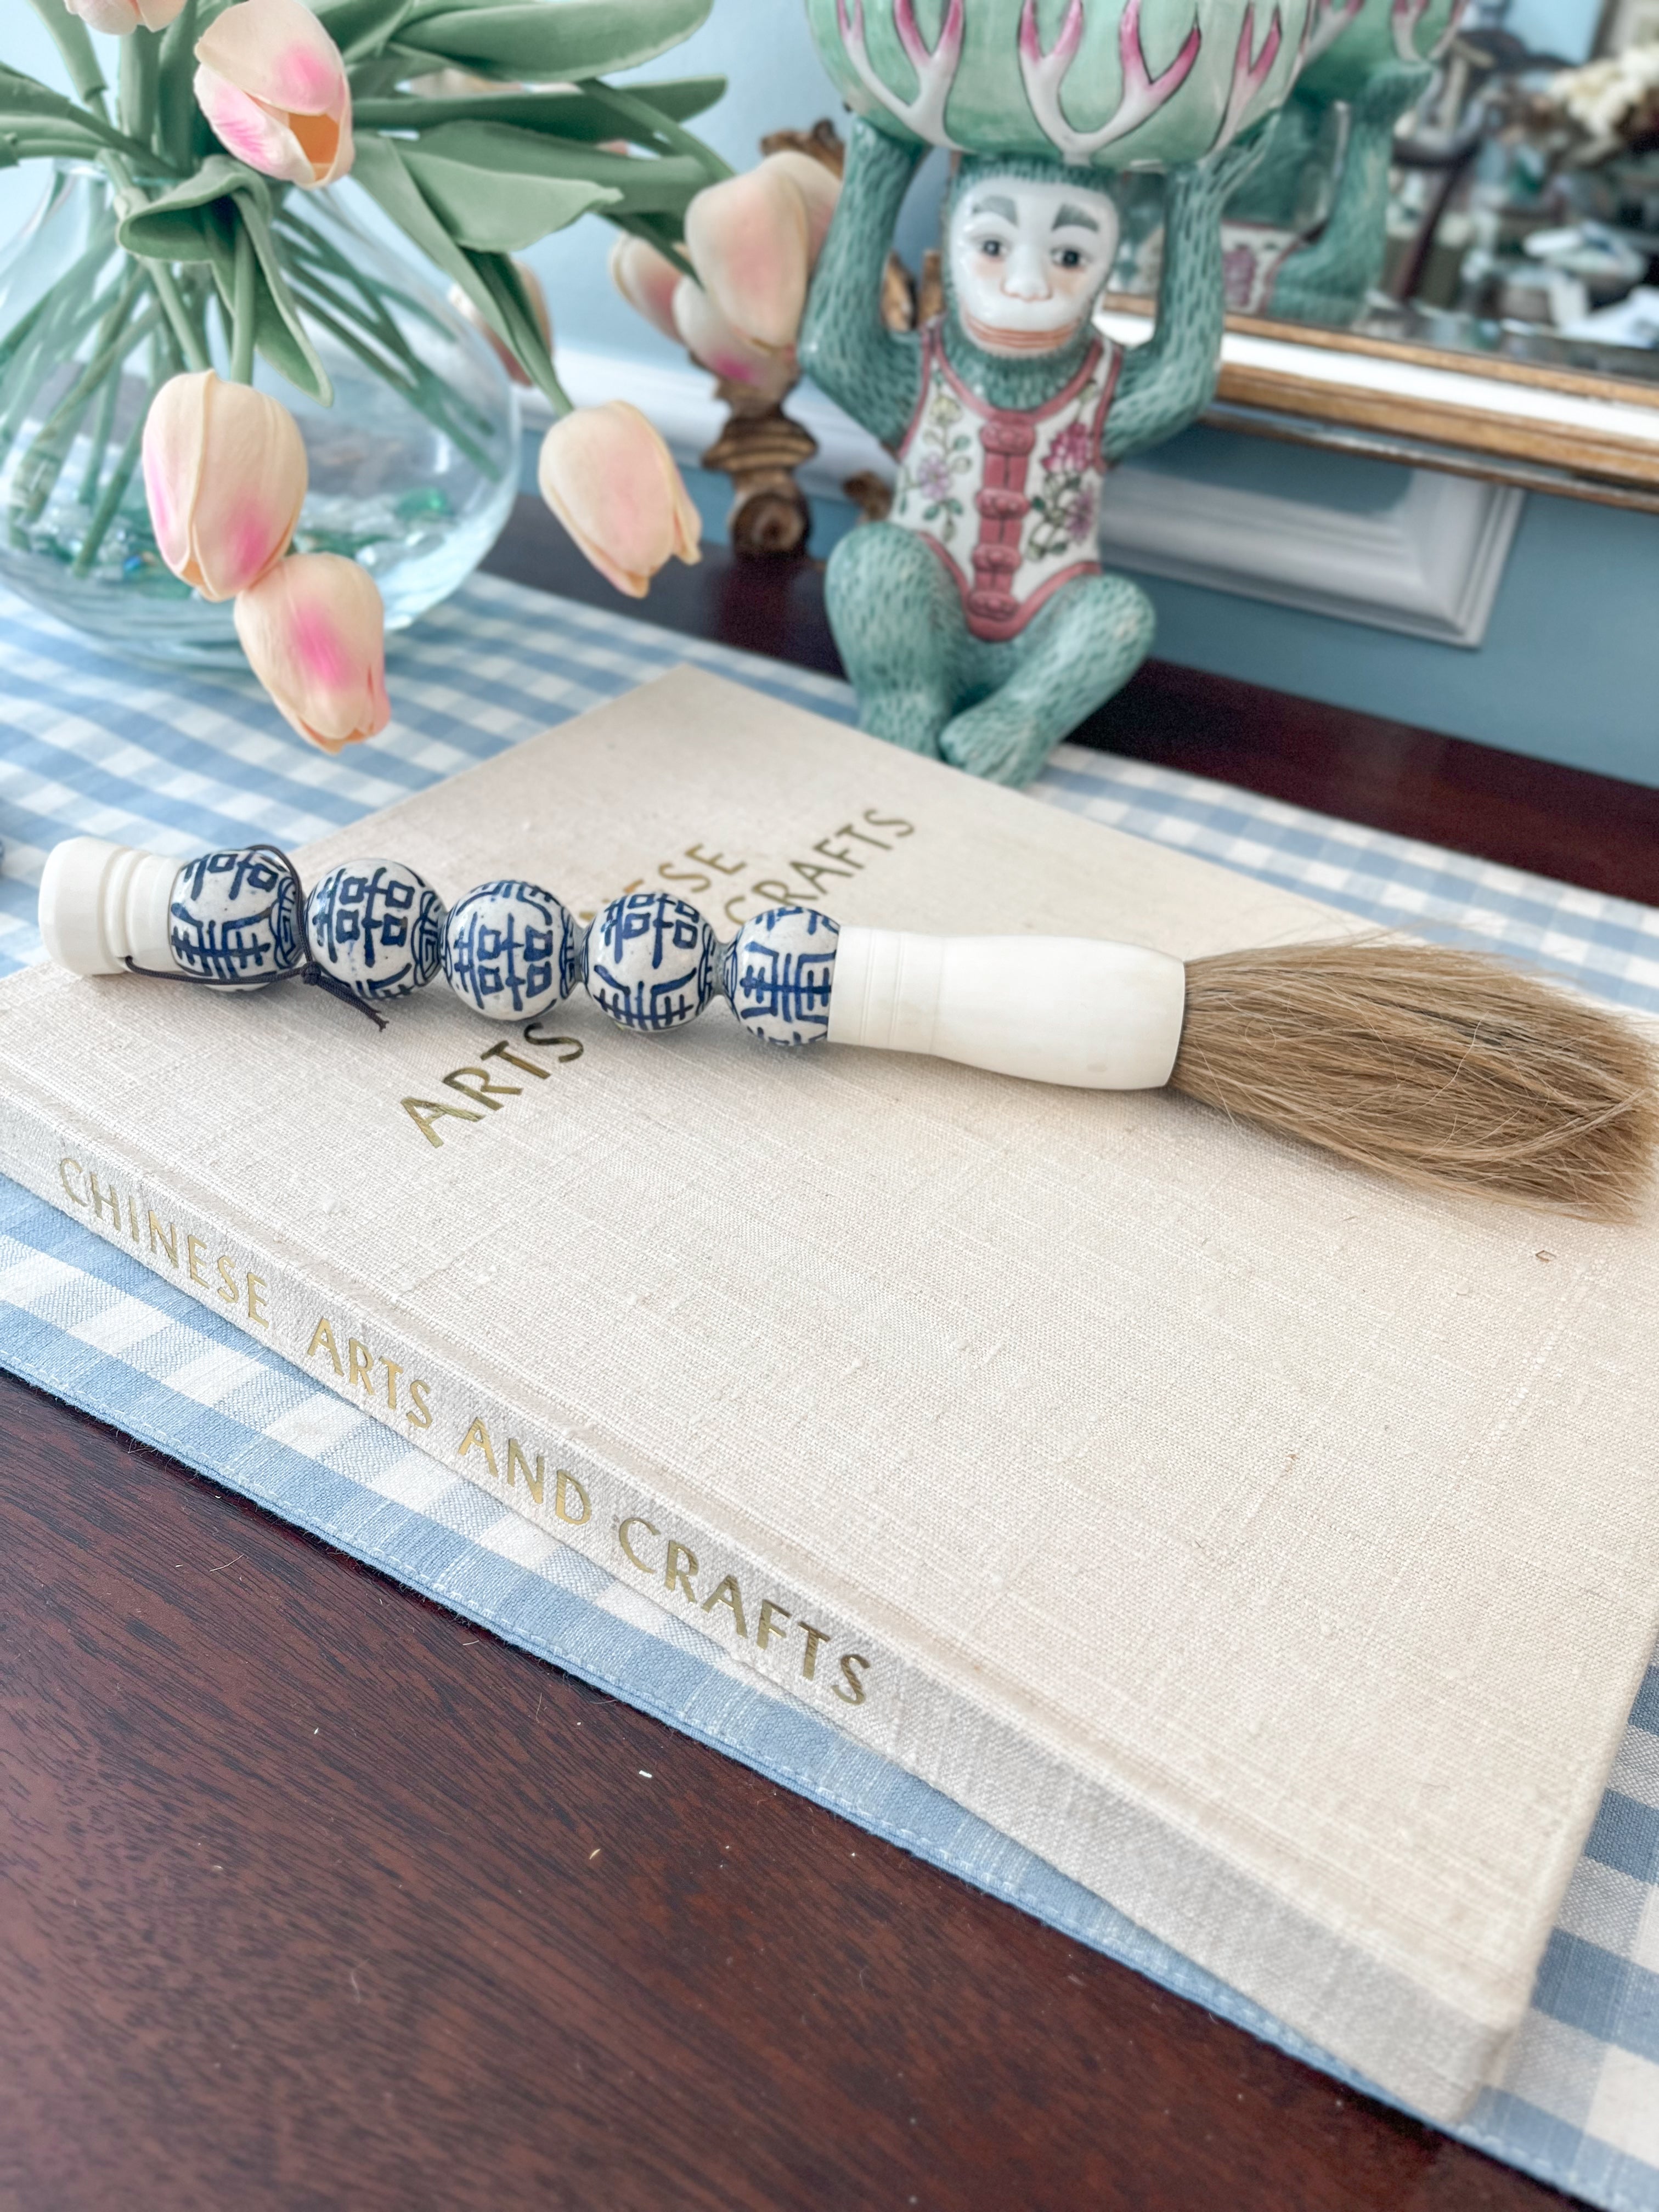 Antique- Style Calligraphy Brush with Blue and White Beads, 11.5"